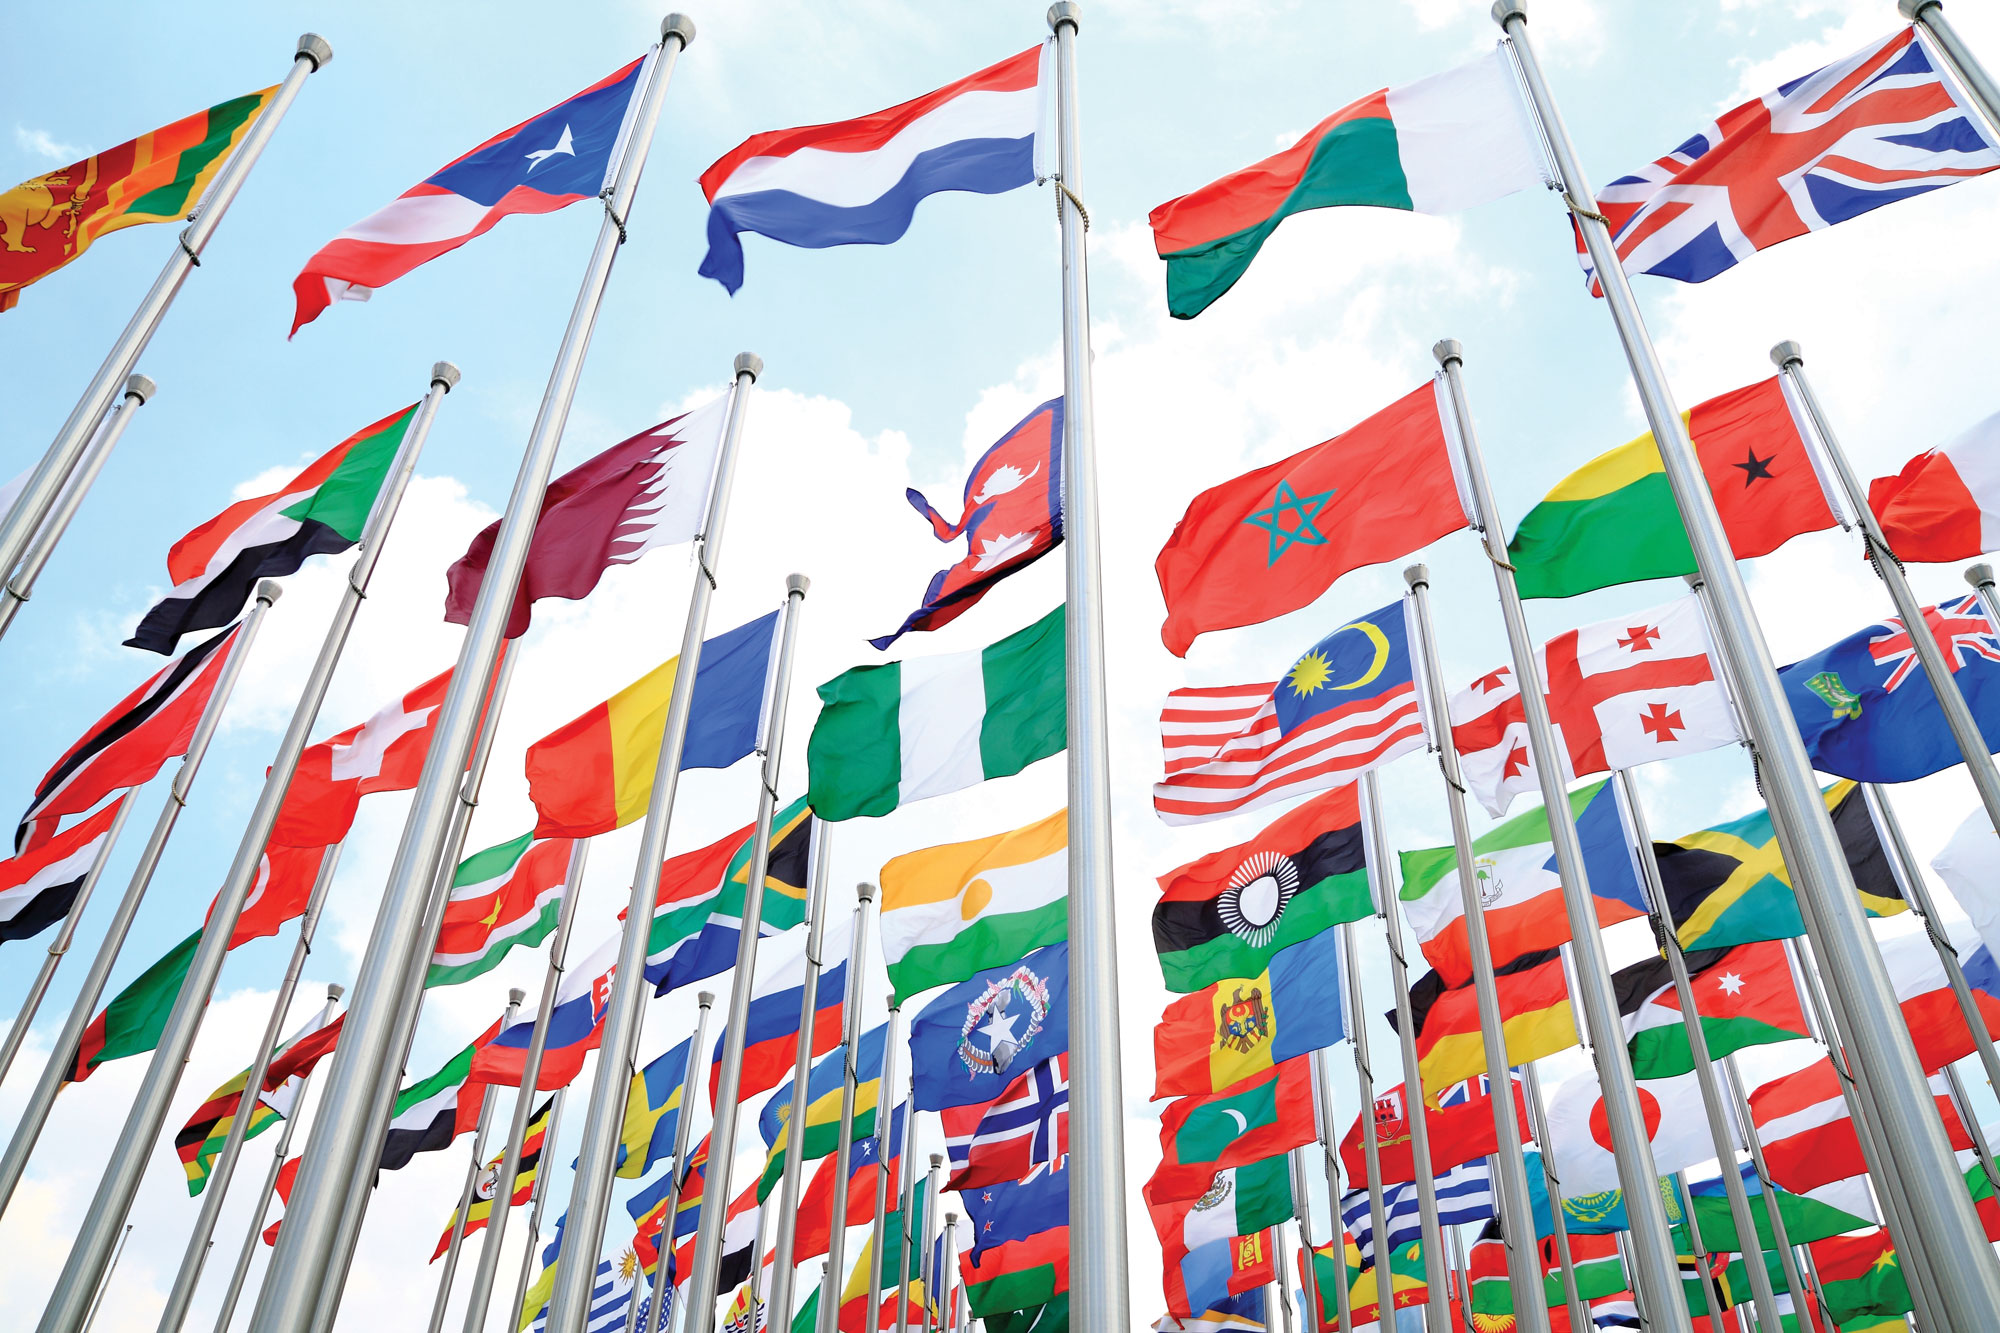 Flags from many countries around the world